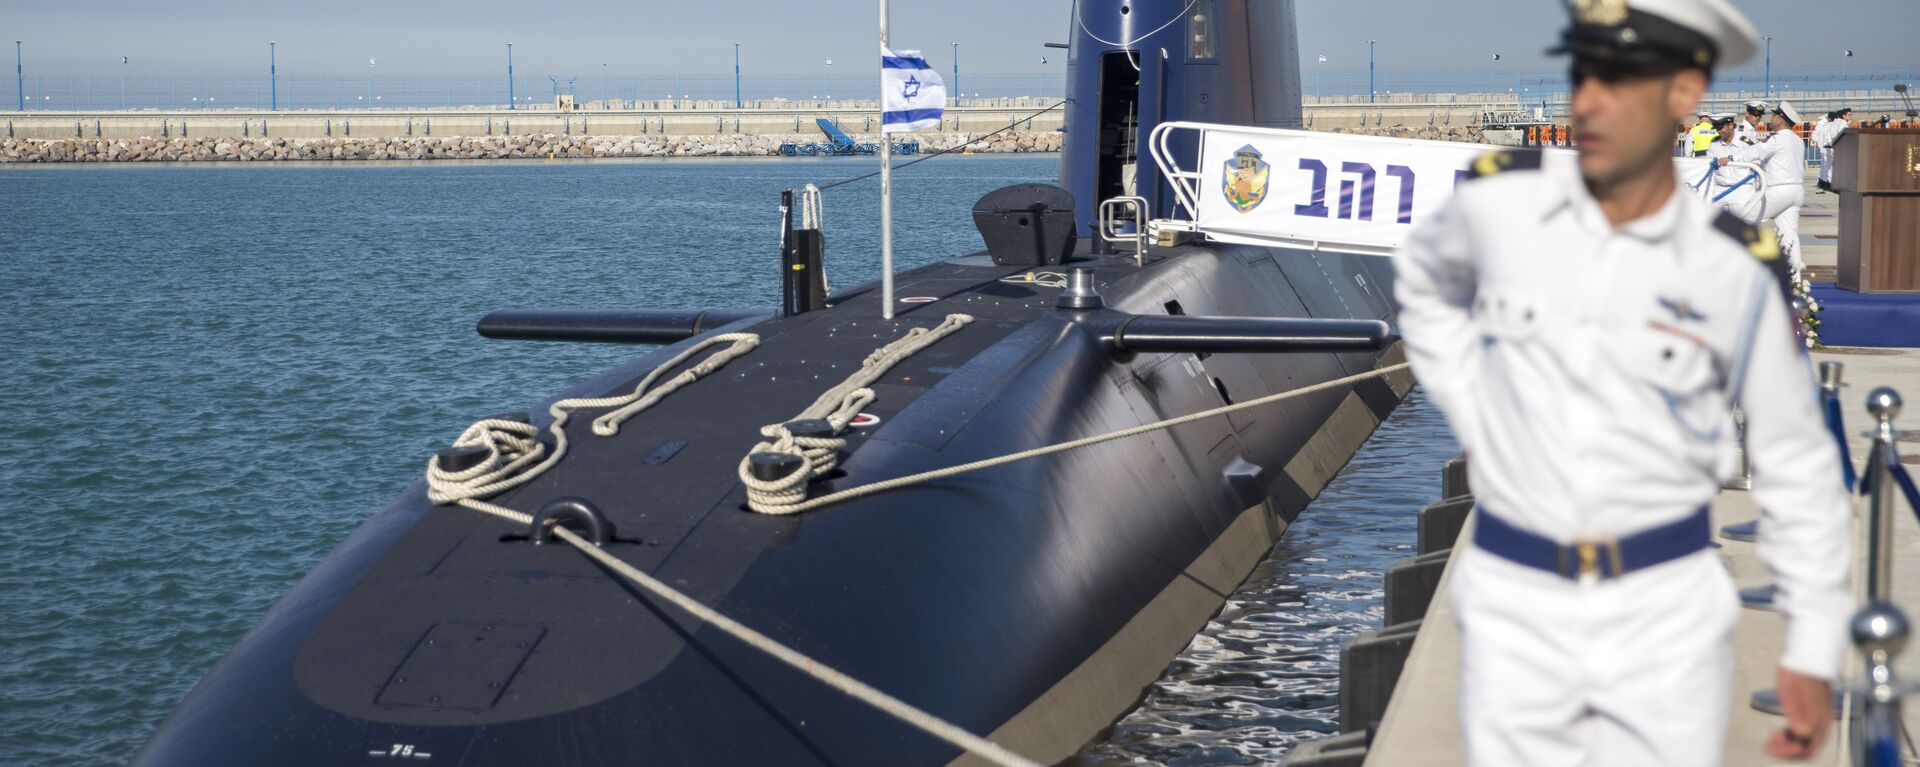 The German-made INS Rahav, the fifth Israeli Navy submarine, arrives at the military port of Haifa on January 12, 2016. In September 2015, Israel received delivery of the fourth Dolphin 2 class submarines from Germany. A third of the cost was funded by Germany as part of its military aid to Israel. The submarines, the most sophisticated in Israel's fleet, can be equipped with missiles armed with nuclear warheads. - Sputnik International, 1920, 15.10.2021